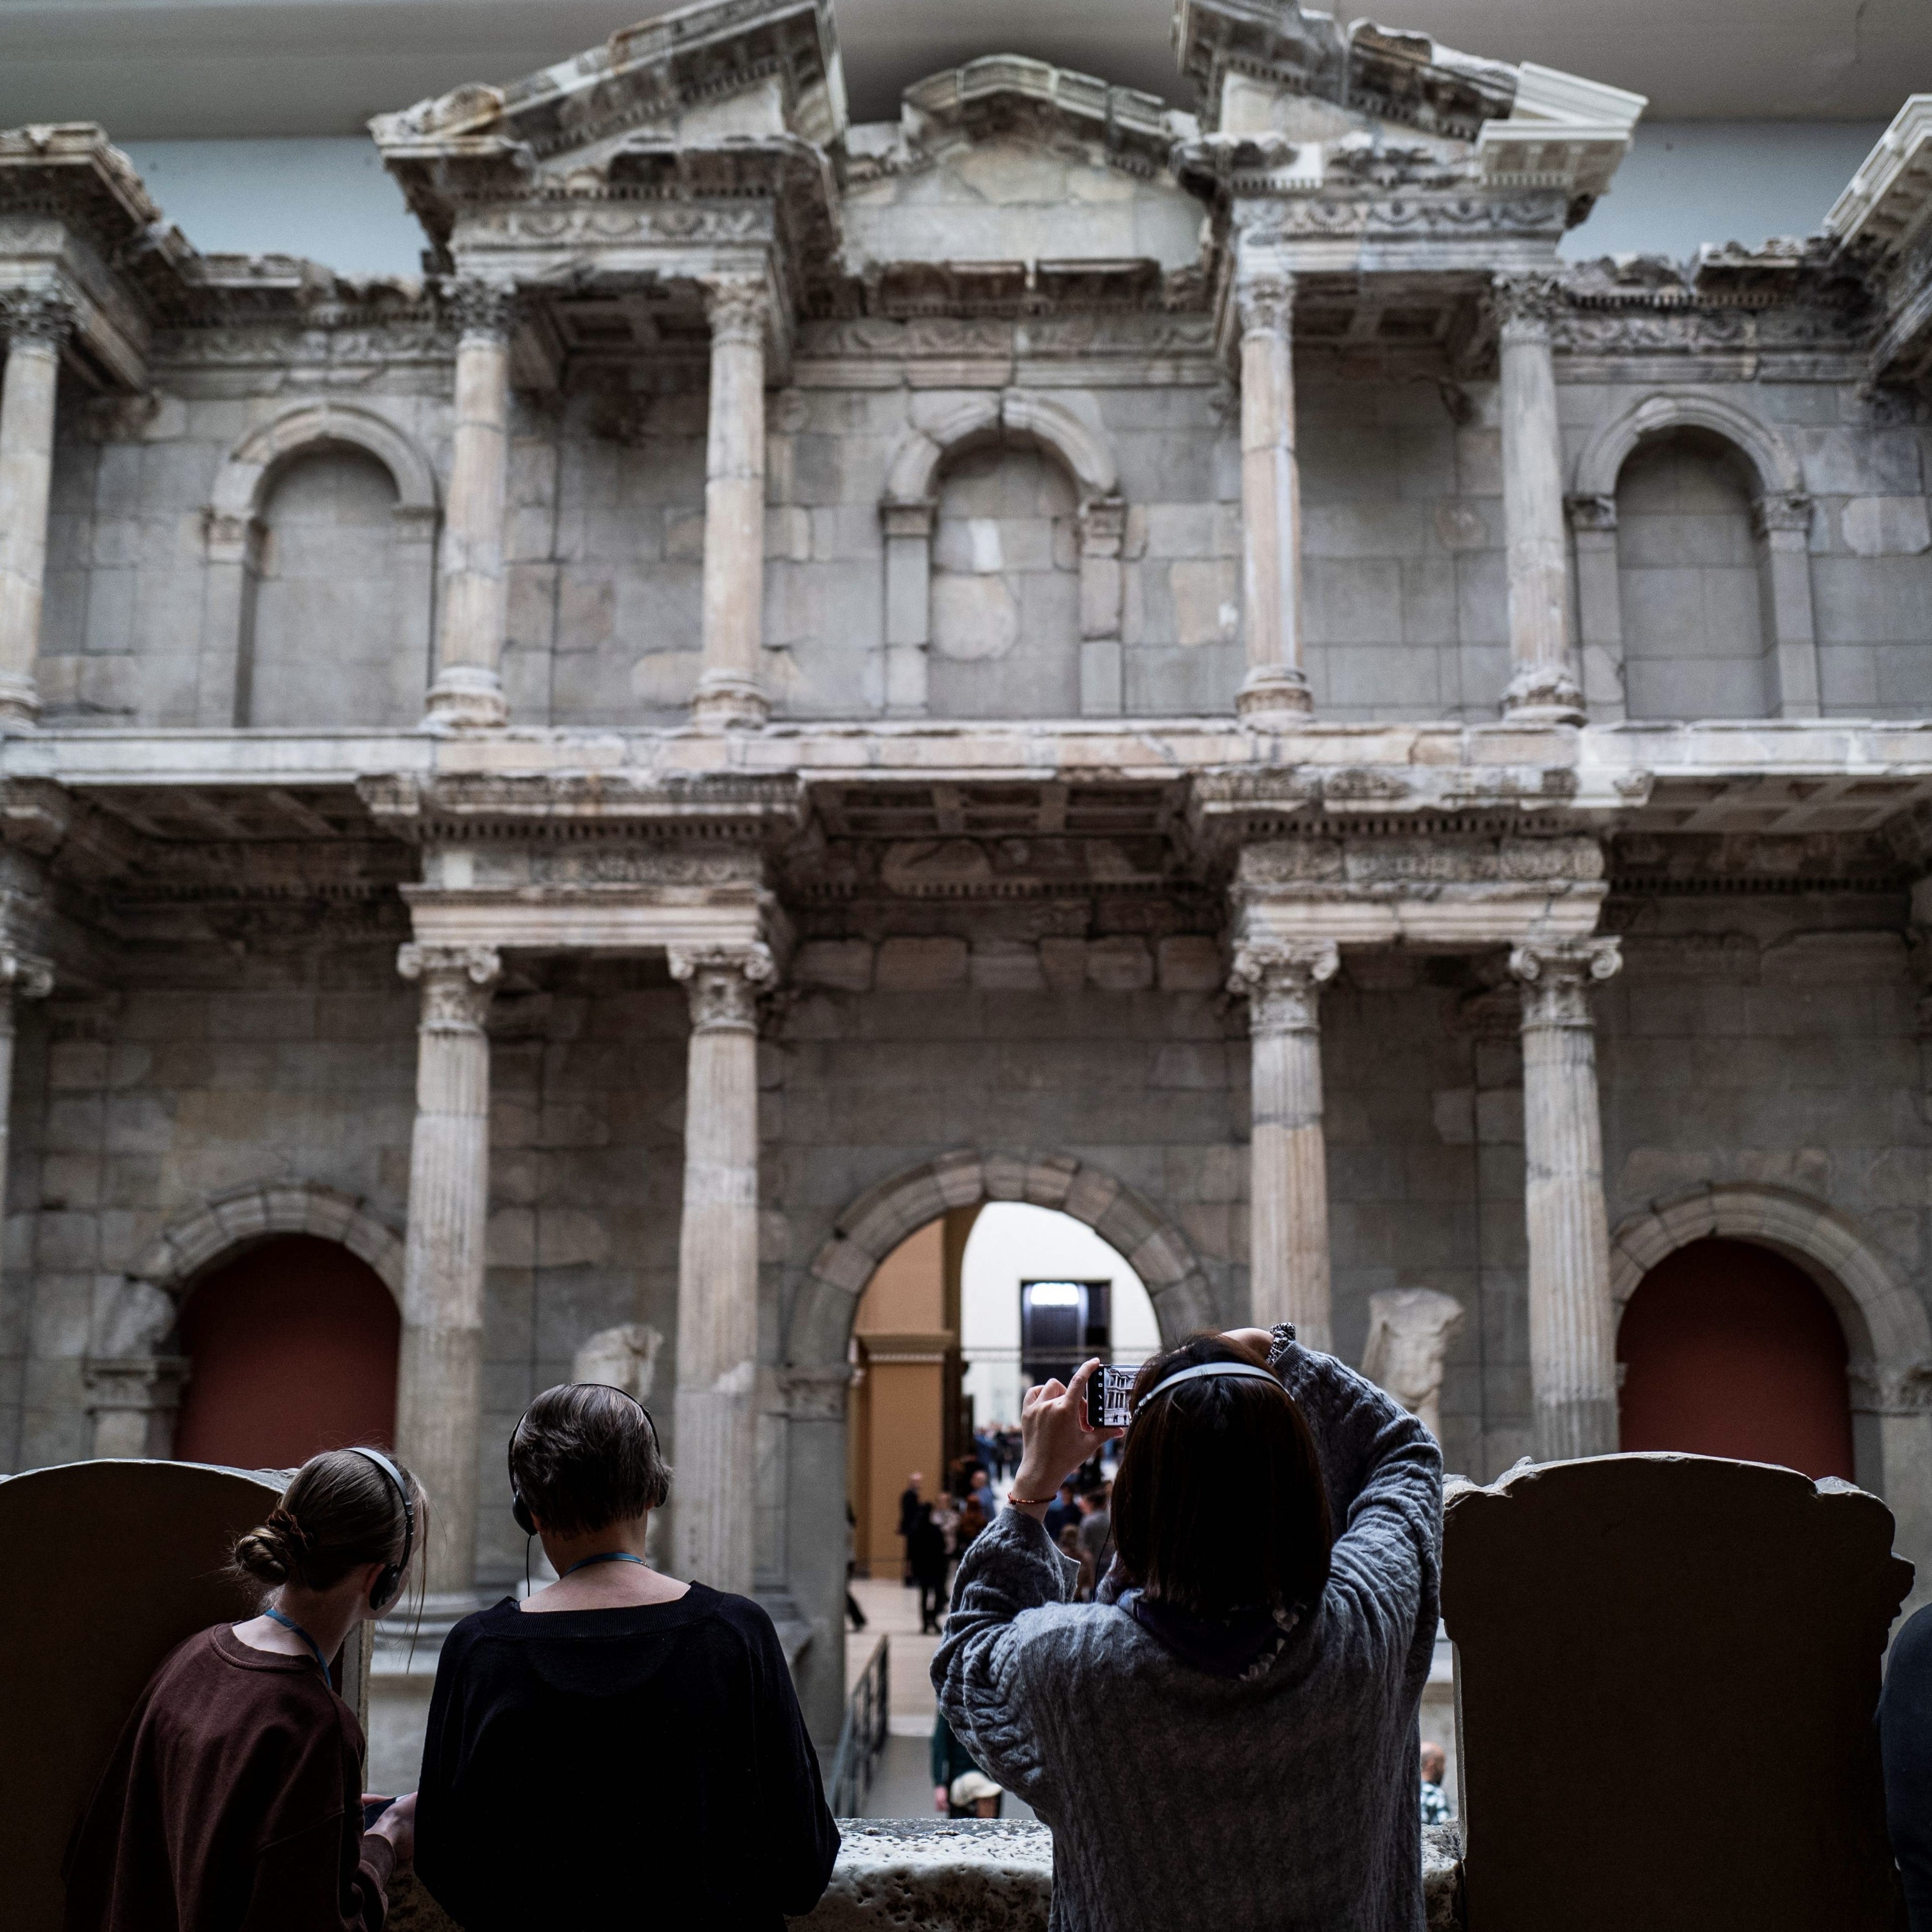 Visitors look at the ancient Roman Market Gate of Miletus in Berlin's Pergamon Museum on April 4, 2023. - The Pergamon Museum will close for a period of two years for renovation in October 2023. (Photo by John MACDOUGALL / AFP) / RESTRICTED TO EDITORIAL USE - MANDATORY MENTION OF THE ARTIST UPON PUBLICATION - TO ILLUSTRATE THE EVENT AS SPECIFIED IN THE CAPTION (Photo by JOHN MACDOUGALL/AFP via Getty Images).1250761195.leisure, Horizontal, ILLUSTRATION, topix, bestof
1250761195
leisure,  Horizontal,  ILLUSTRATION,  topix,  bestof,  Adult,  Arch,  Architecture,  Boy,  Building,  Child,  Female,  Girl,  Male,  Man,  Person,  Teen,  Woman